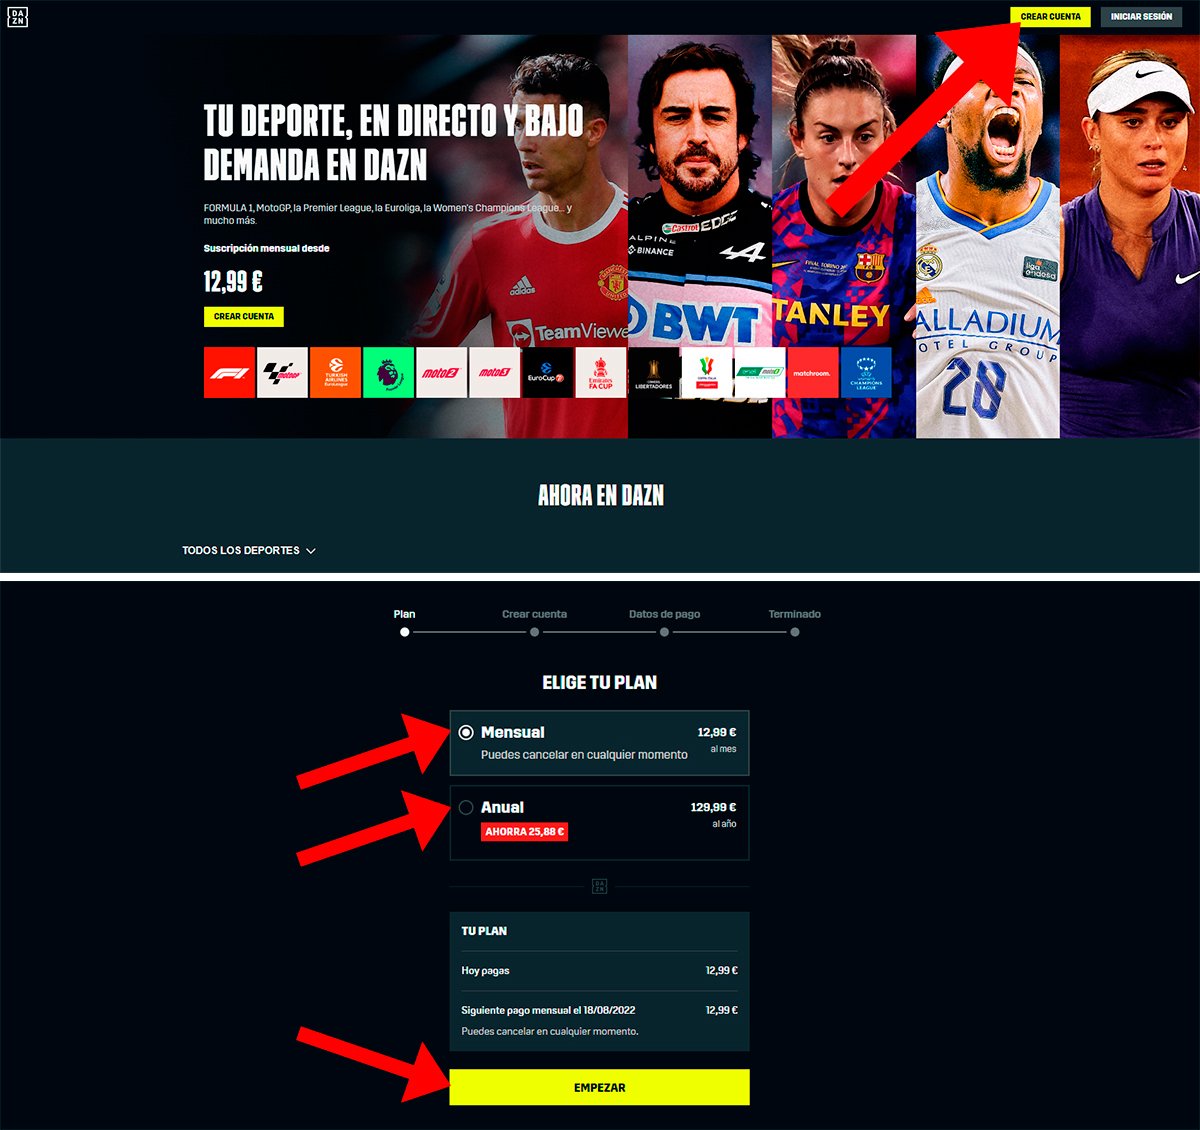 How to hire DAZN in Spain step by step